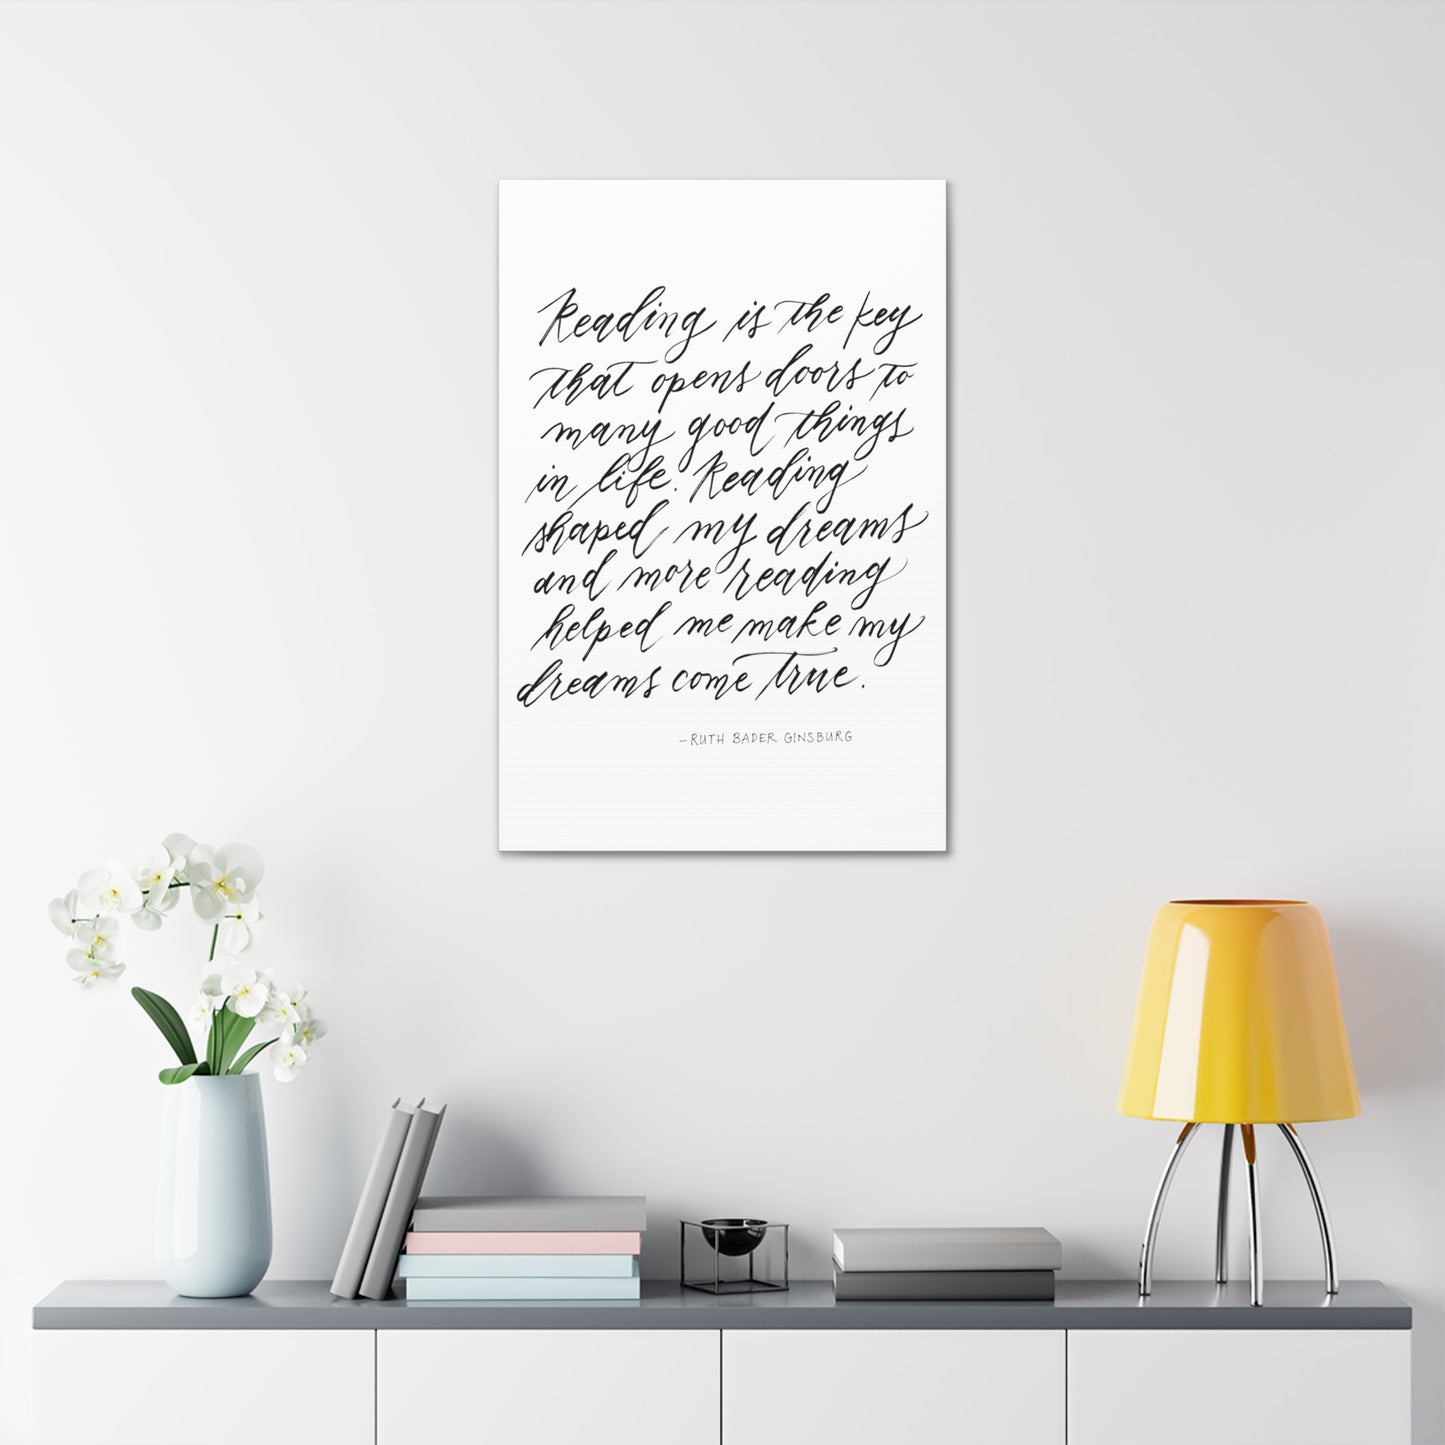 Wall Decor Canvas - "Reading is Key" Ruth Bader Ginsburg RBG Quote Calligraphy Printed on Stretched Canvas Wall Decor